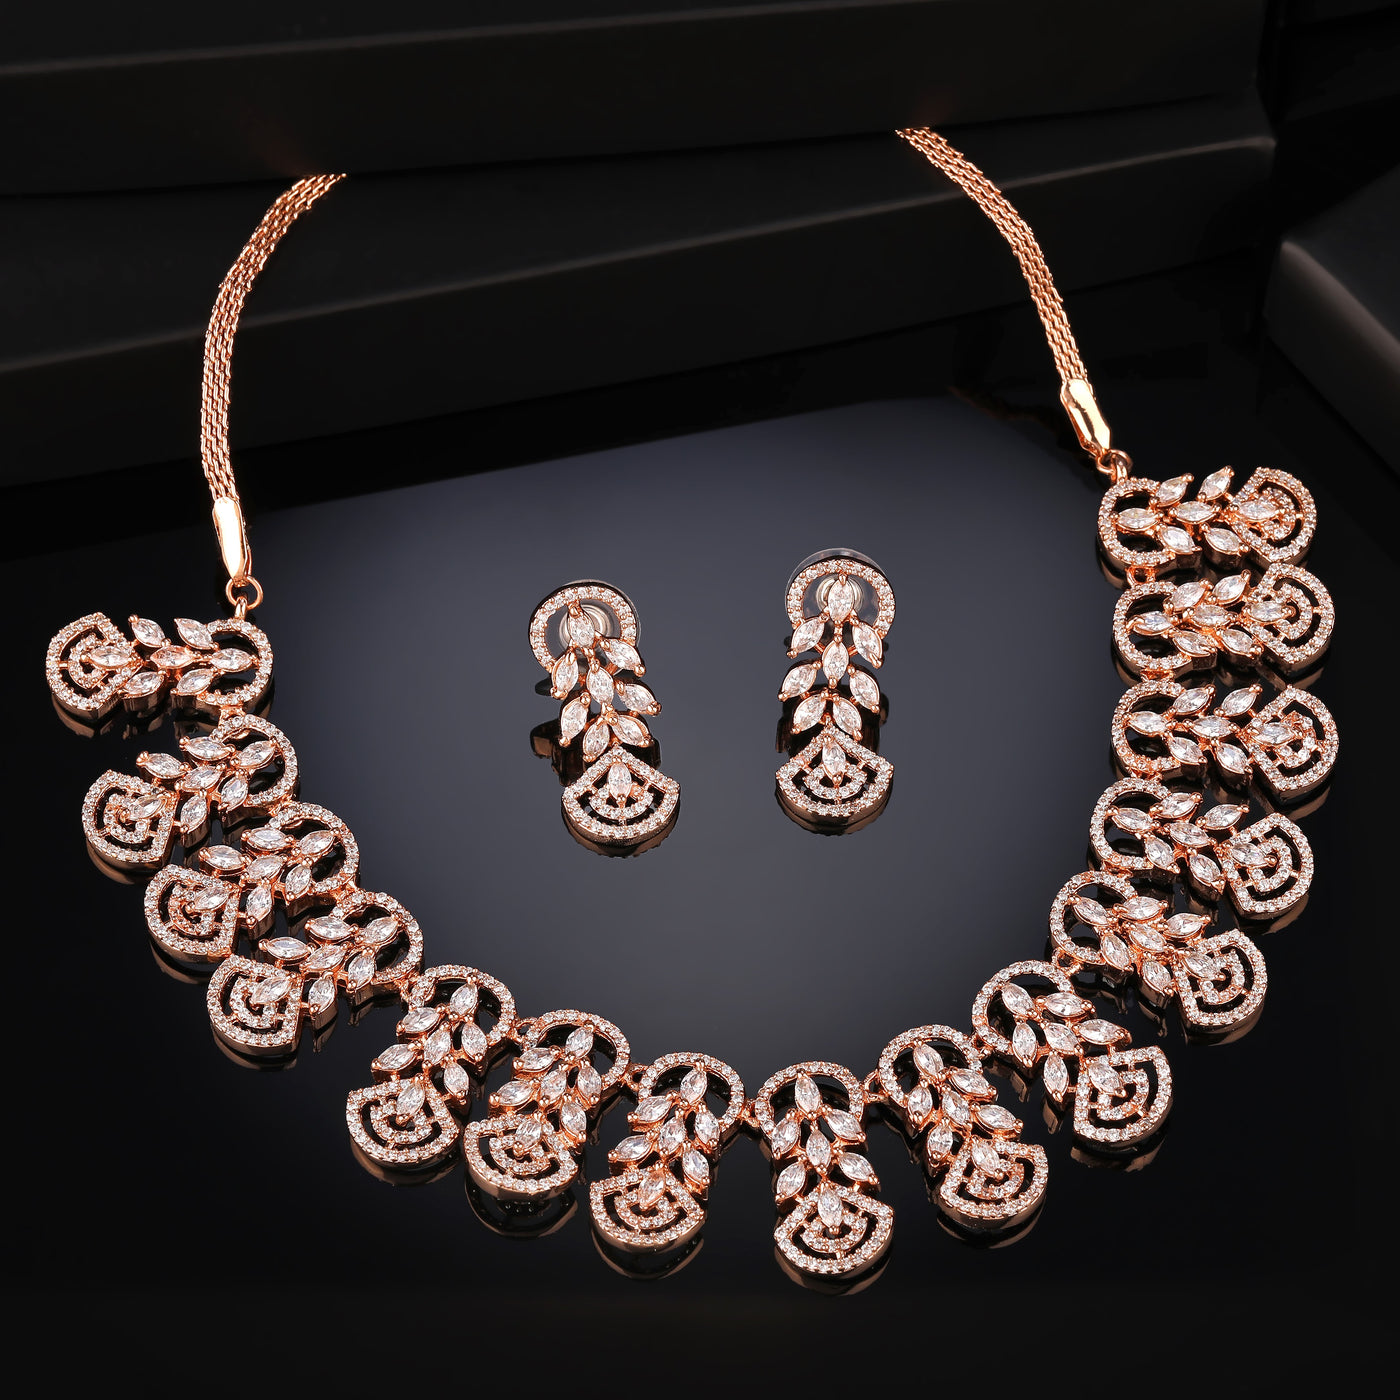 Estele Rose Gold Plated CZ Marquise Melody Necklace Set for Women